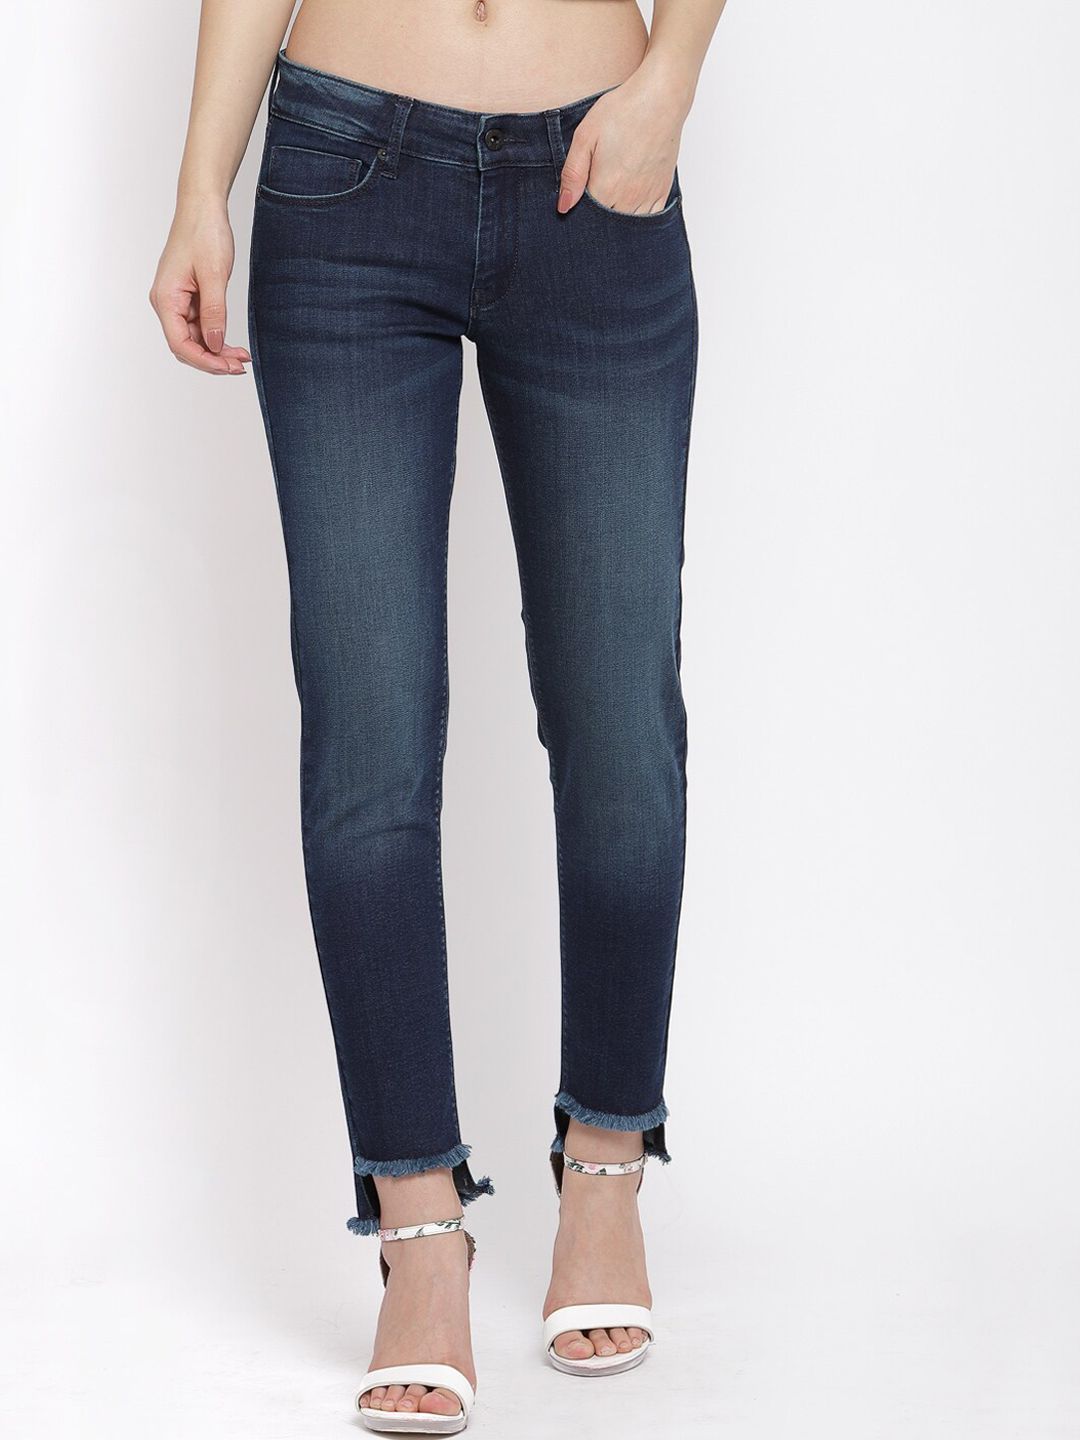 Pepe Jeans Women Blue Skinny Fit Jeans Price in India